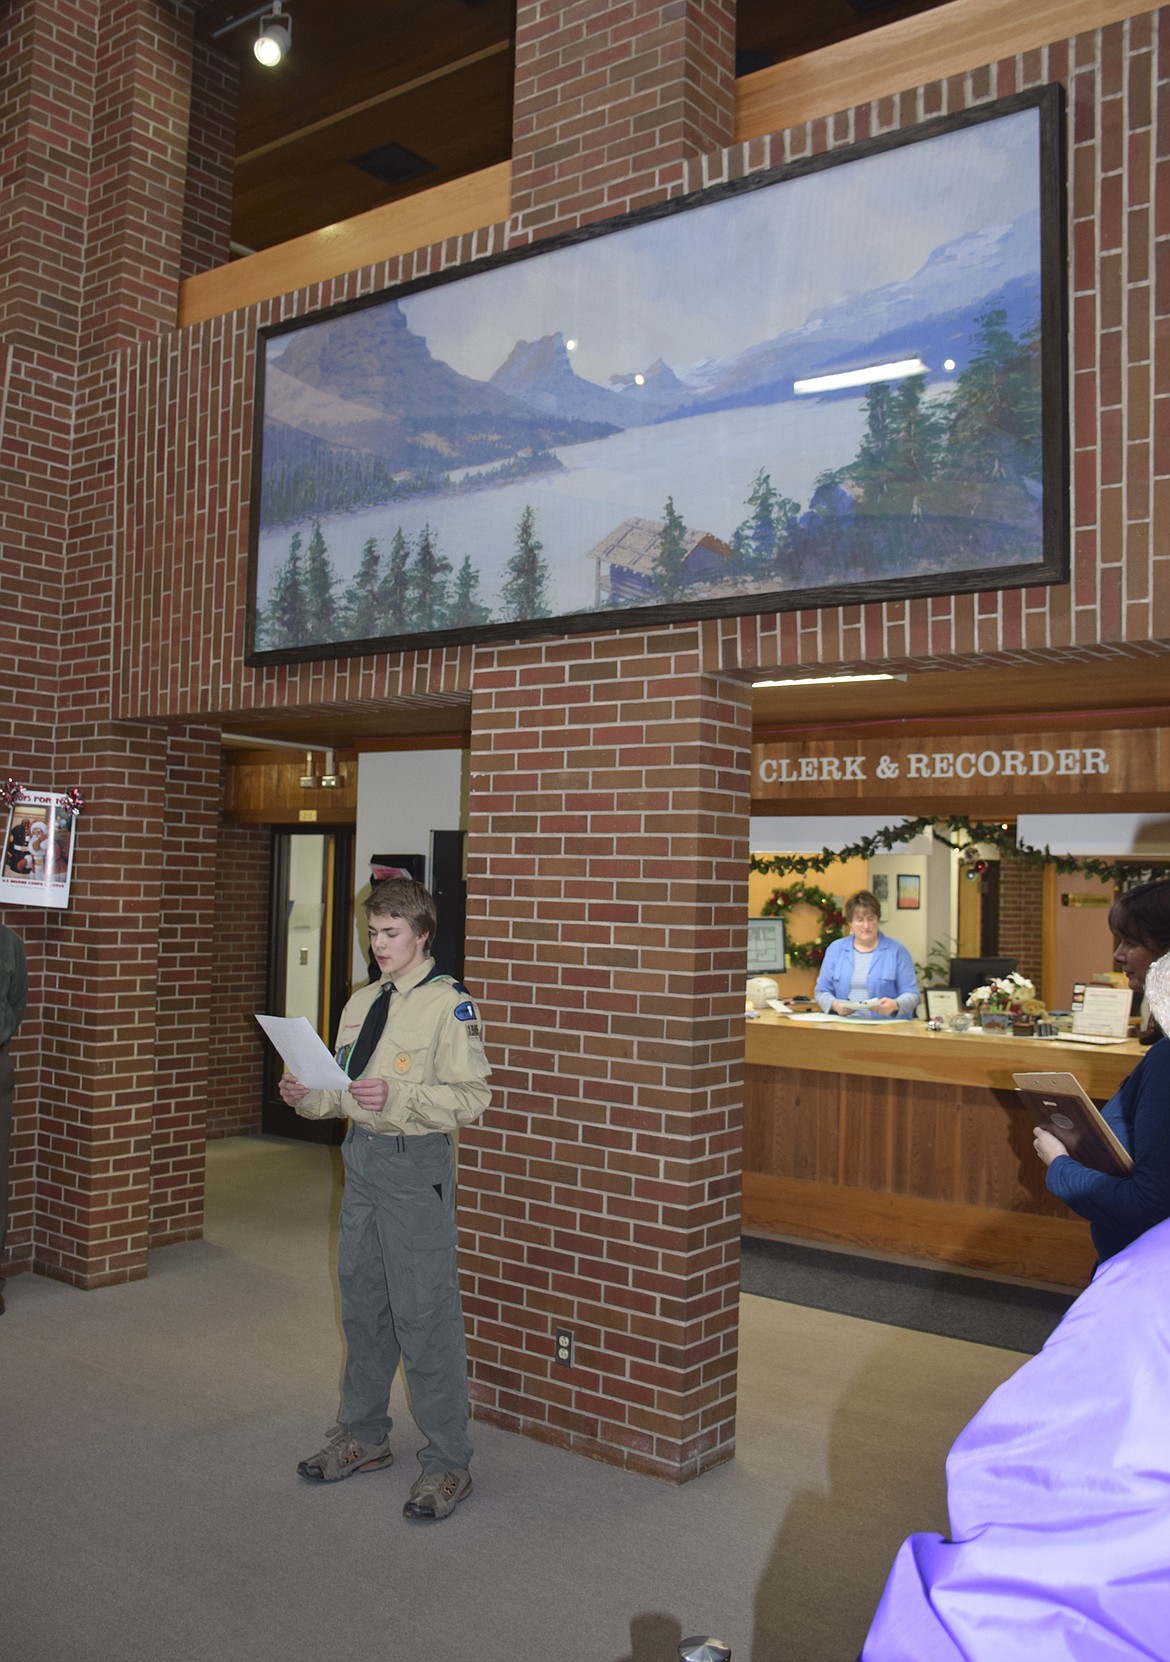 BOY SCOUT Ethan McCauley addresses the crowd during the official unveiling of the restored mural &#147;St. Mary Lodge&#148; at the Lake County Courthouse in Polson, Dec. 19. (Brett Berntsen/Lake County Leader)